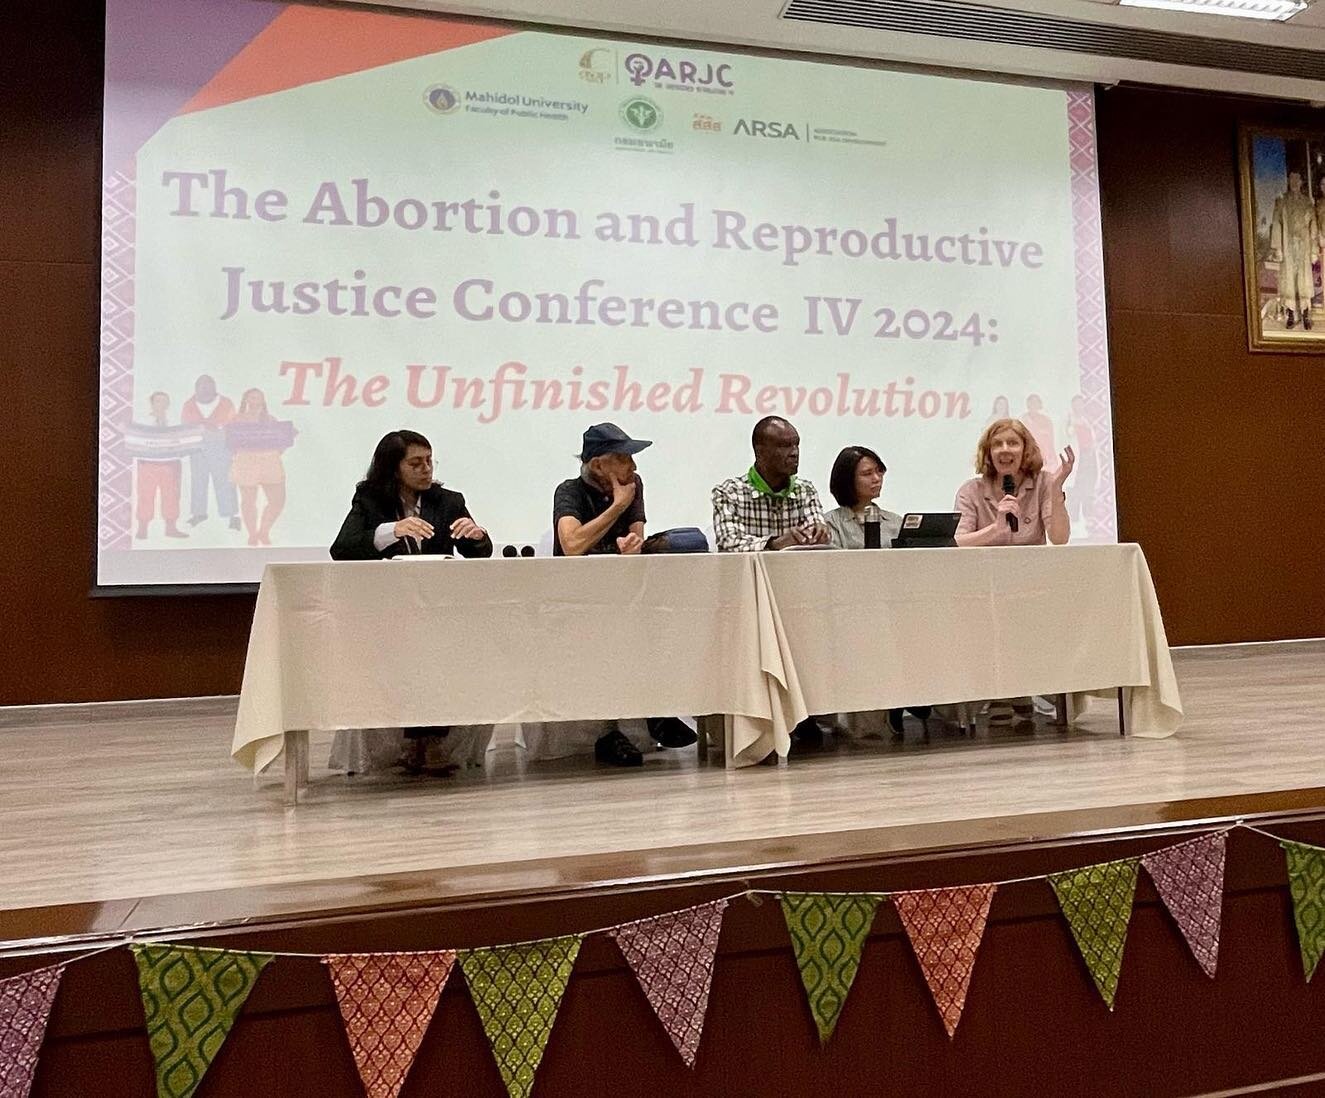 We were delighted to attend the 2024 Abortion and Reproductive Justice Conference. Our co-chair, Jayne Kavangh, spoke on a panel about inspiring conscientious commitment to abortion care. Thank you to all the amazing panellists across the 3 days, who